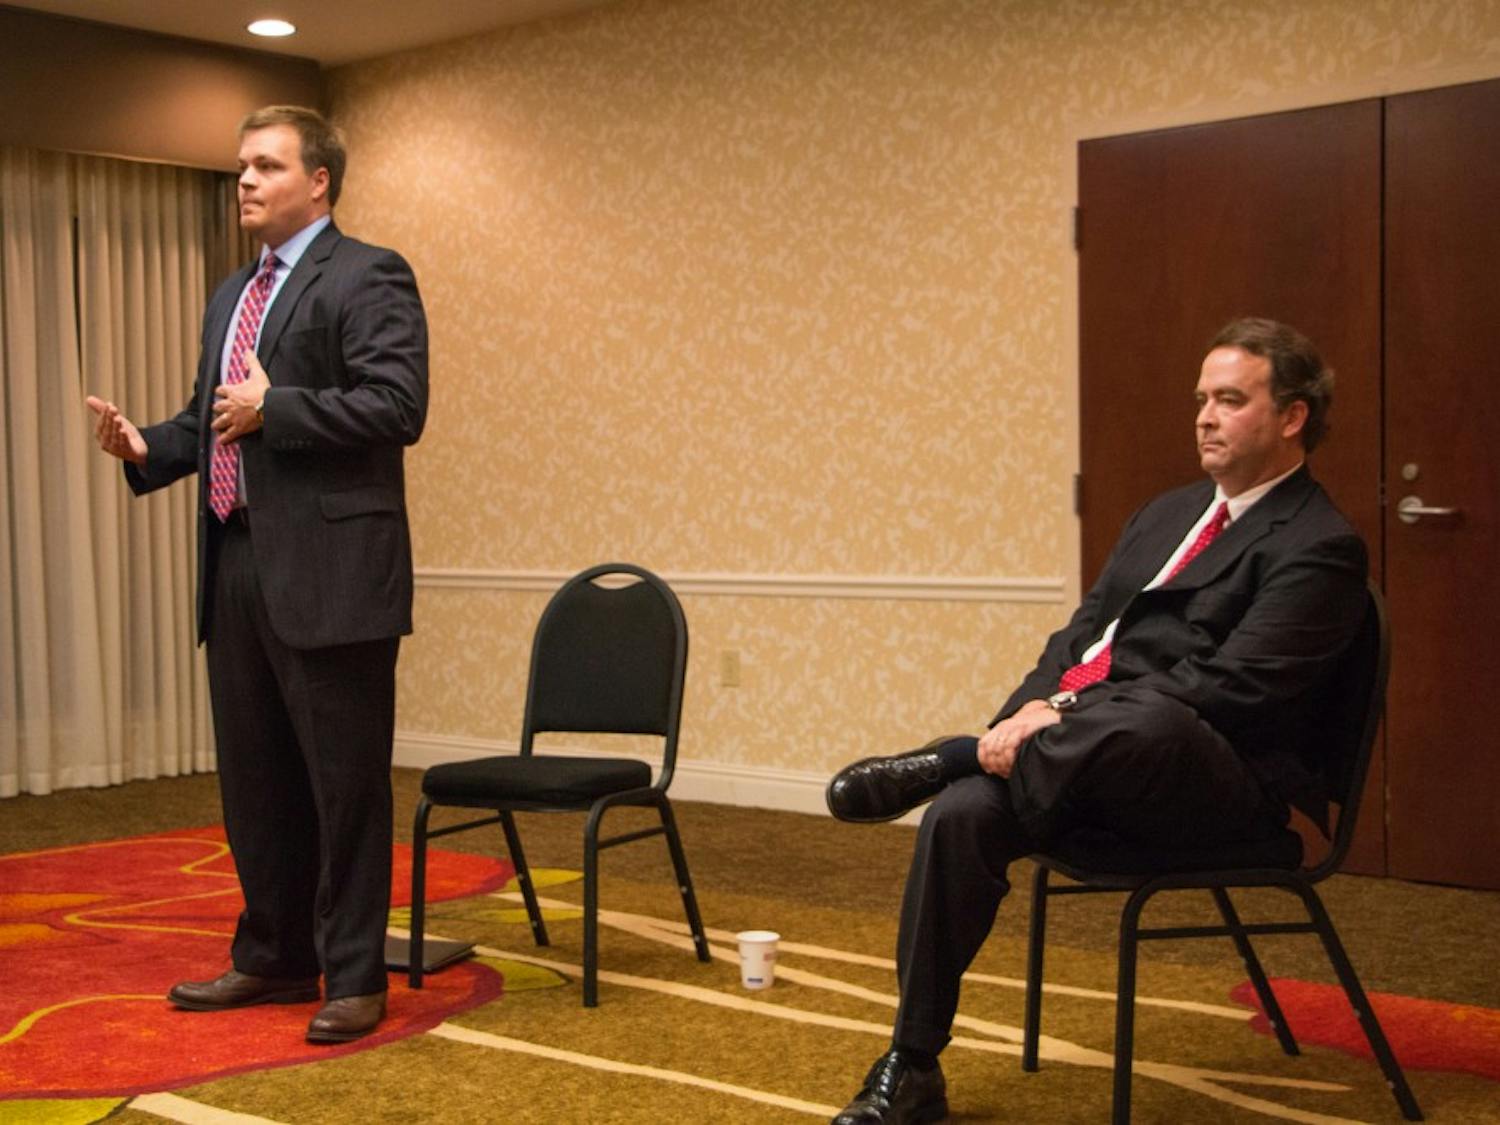 Brandon Hughes and District Attorney&nbsp;Robbie Treese speak to the Lee County Republicans Club at a district attorney candidate forum on Jan. 26, 2016.